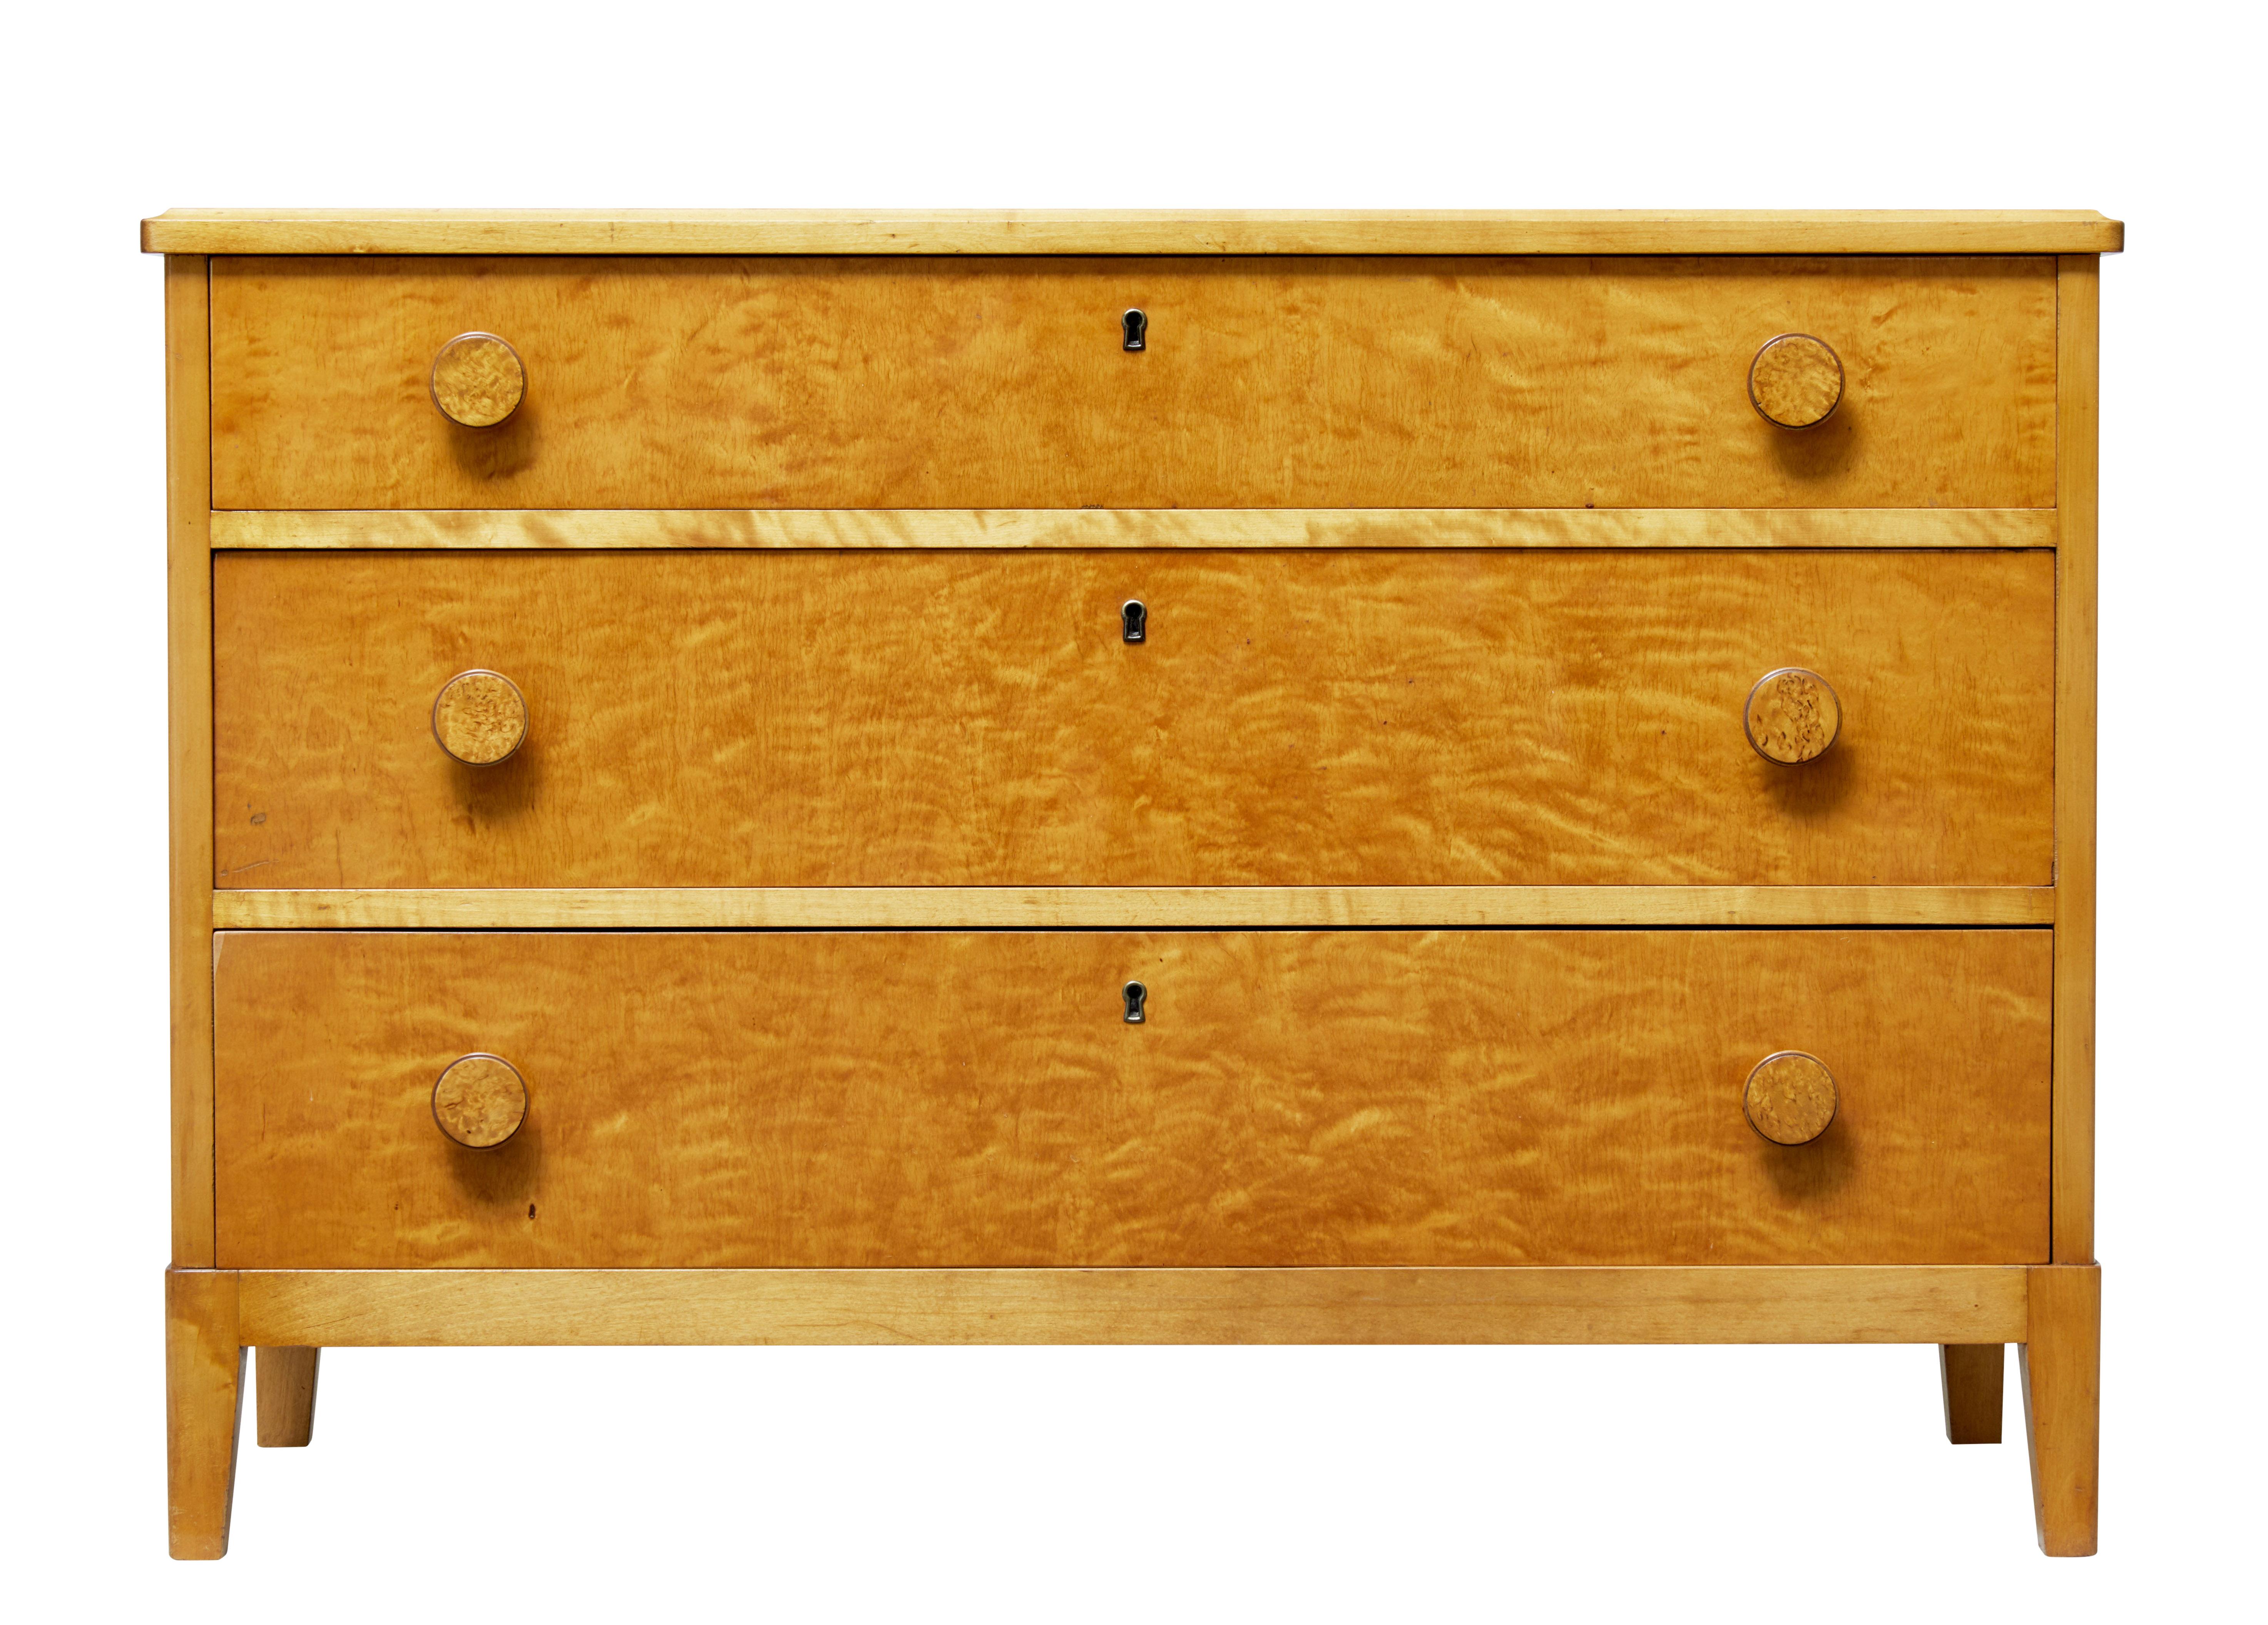 Good quality Swedish chest of drawers, circa 1950.

Fitted with three graduating drawers and burr round knobs.

Rich birch color with fine veneers used. Standing on tapered legs.

Minor surface marks.